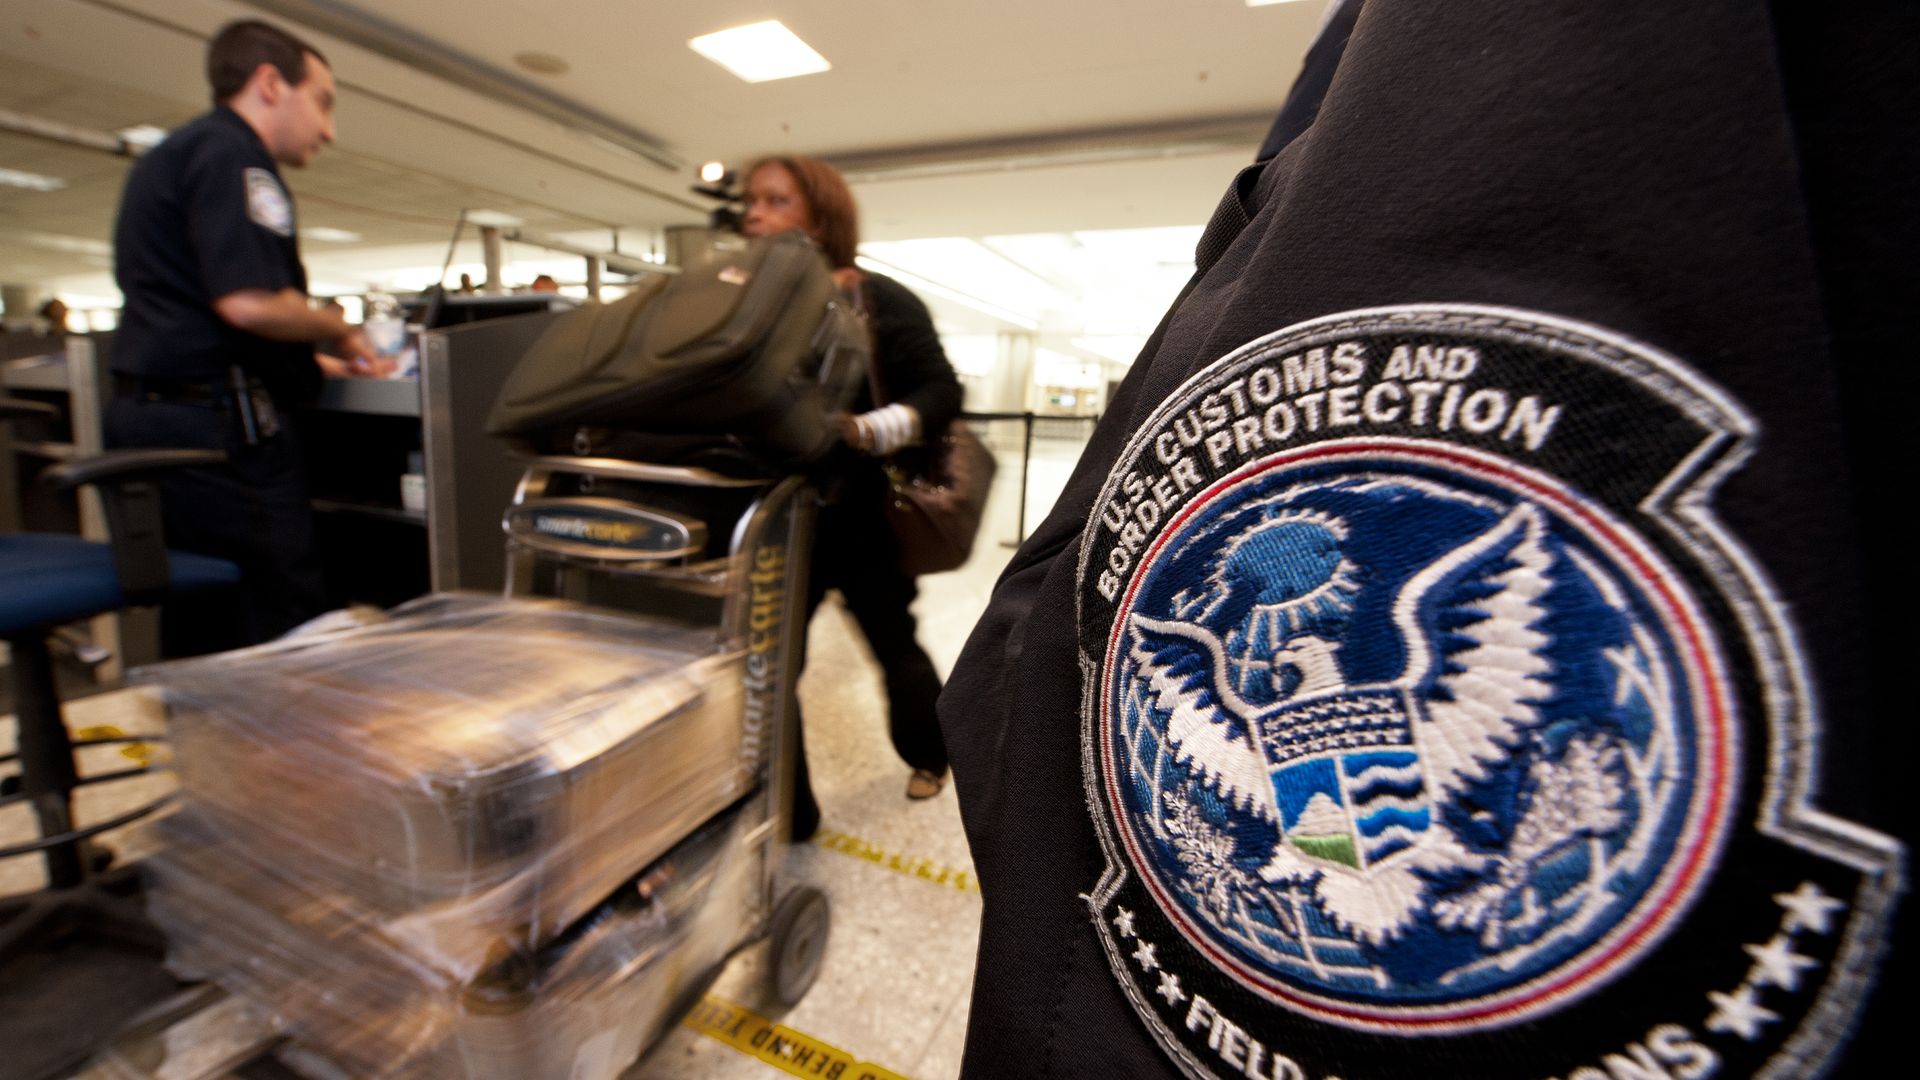 An international air traveler is cleared by a US Customs and Border Protection Offic  inside the US Customs and Immigration area at Dulles International Airport (IAD